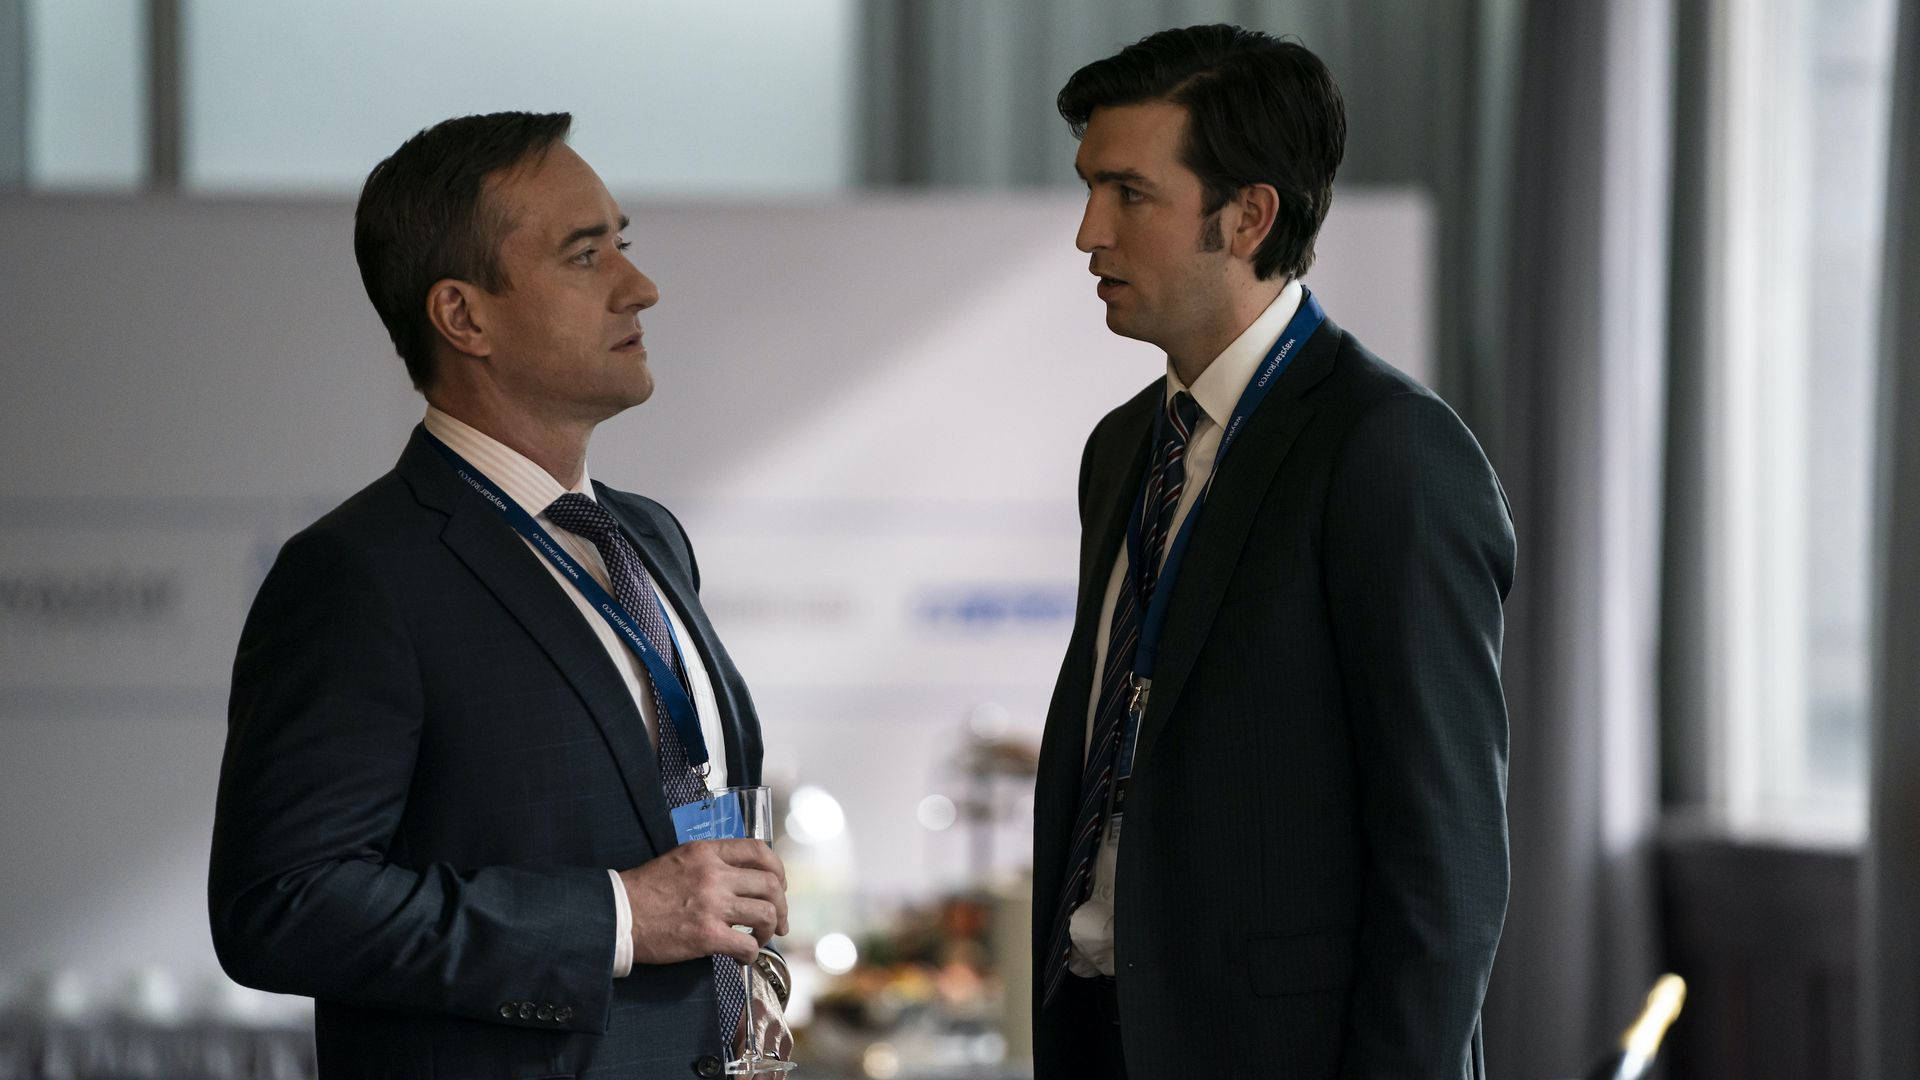 Intriguing Pic From Succession Featuring Characters Greg And Tom